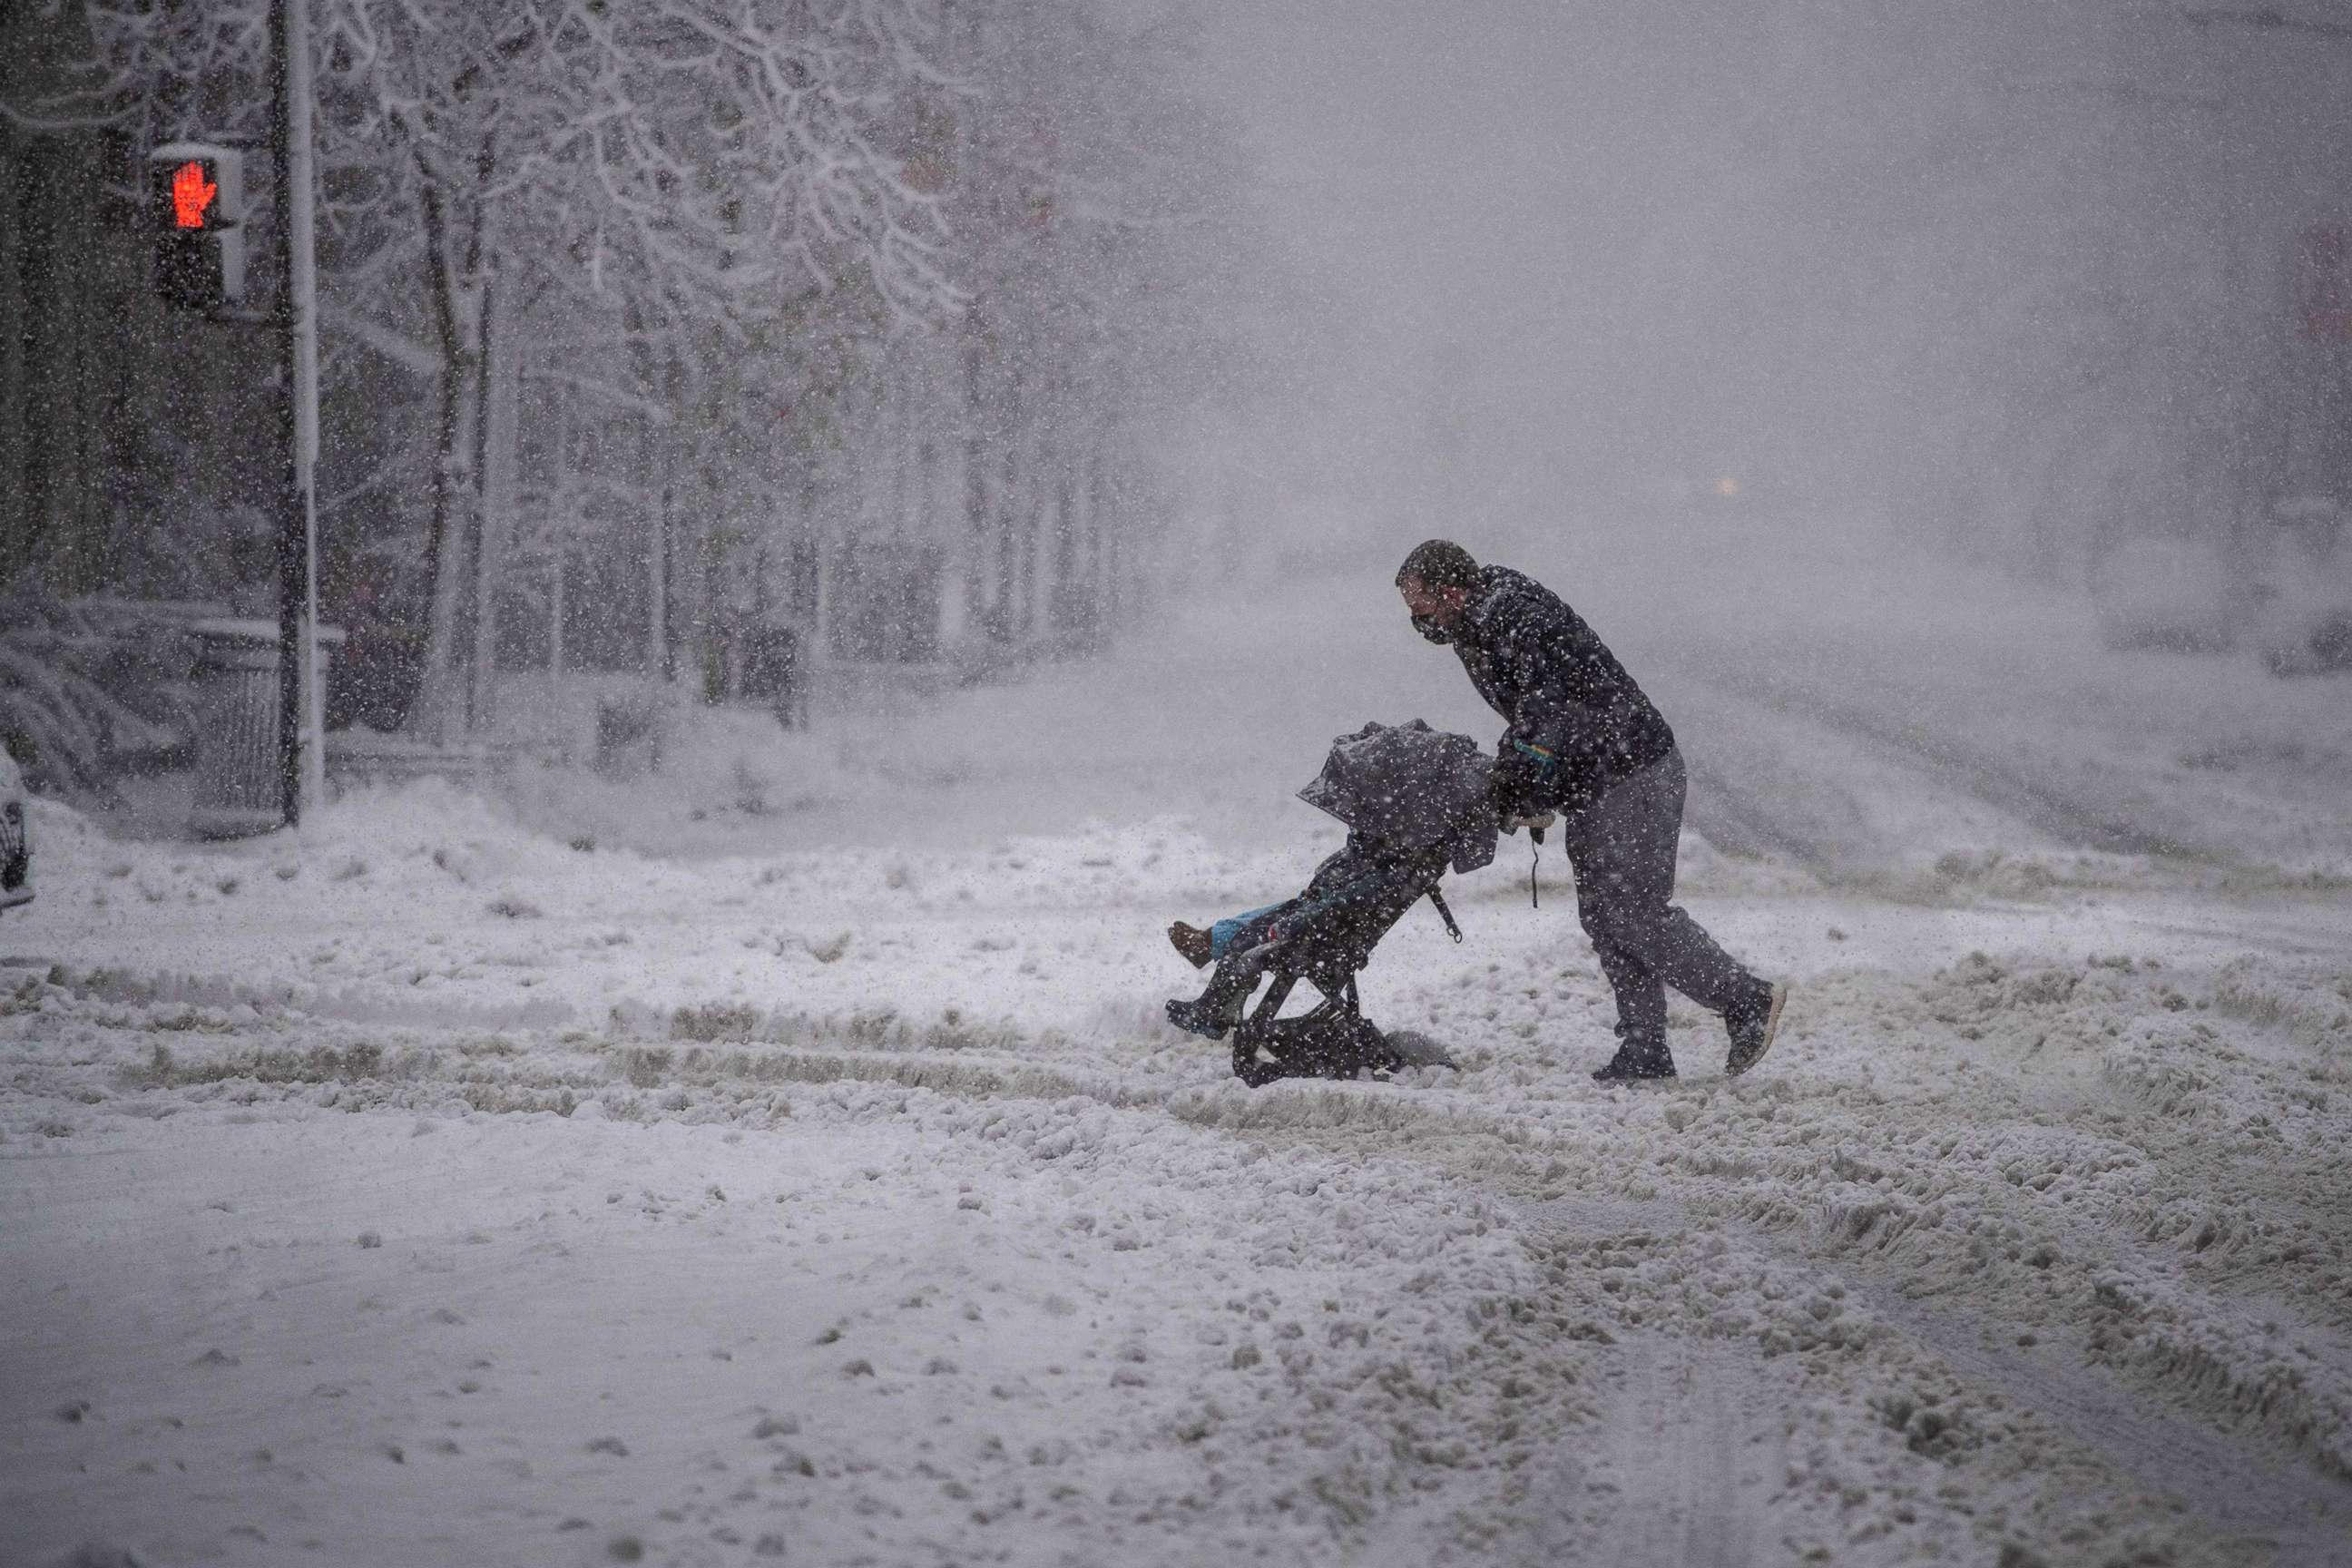 PHOTO: A man tries to negotiate crossing a street with a double baby stroller during a snow storm in downtown Washington, D.C., Jan. 3, 2022, as a winter storm brought heavy snow to the region.